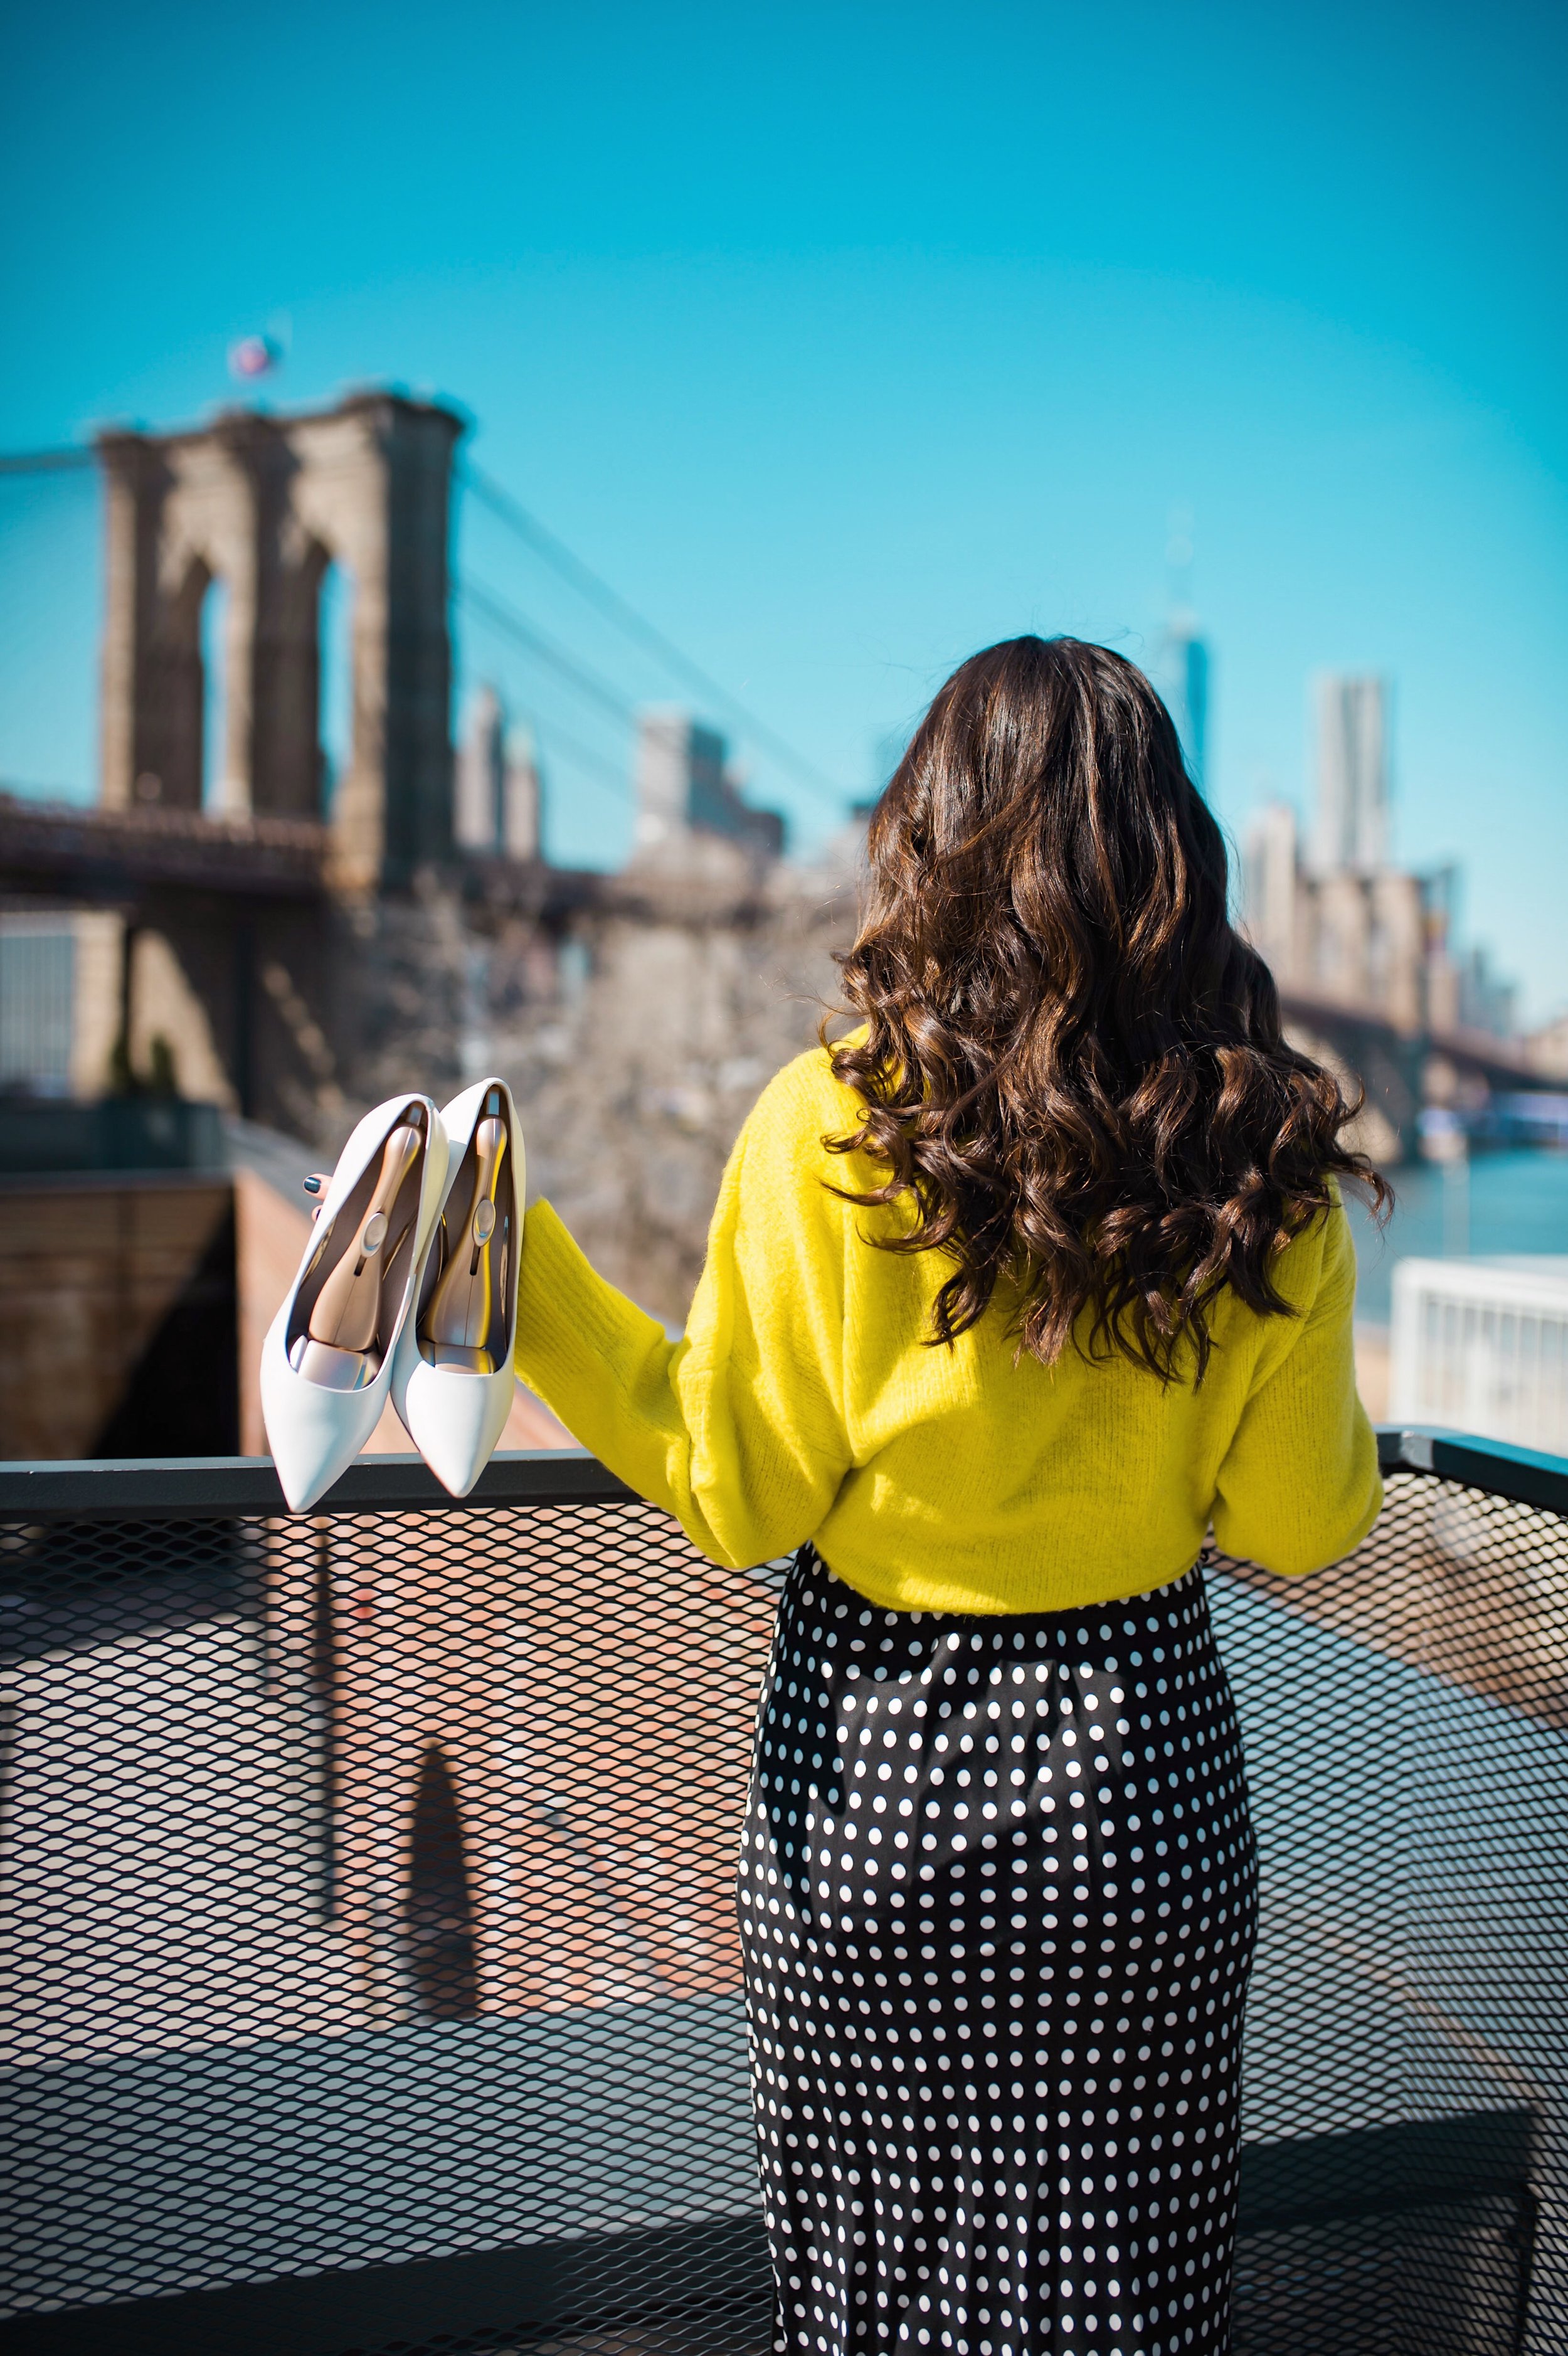 How I Wound Up With Boring White Dishes Navy Polka Dot Dress Neon Yellow Knotted Sweater Esther Santer Fashion Blog NYC Street Style Blogger Outfit OOTD Trendy Shopping Girl What How To Wear White Heels Photoshoot Laurel Creative Dumbo Brooklyn Bridge.JPG